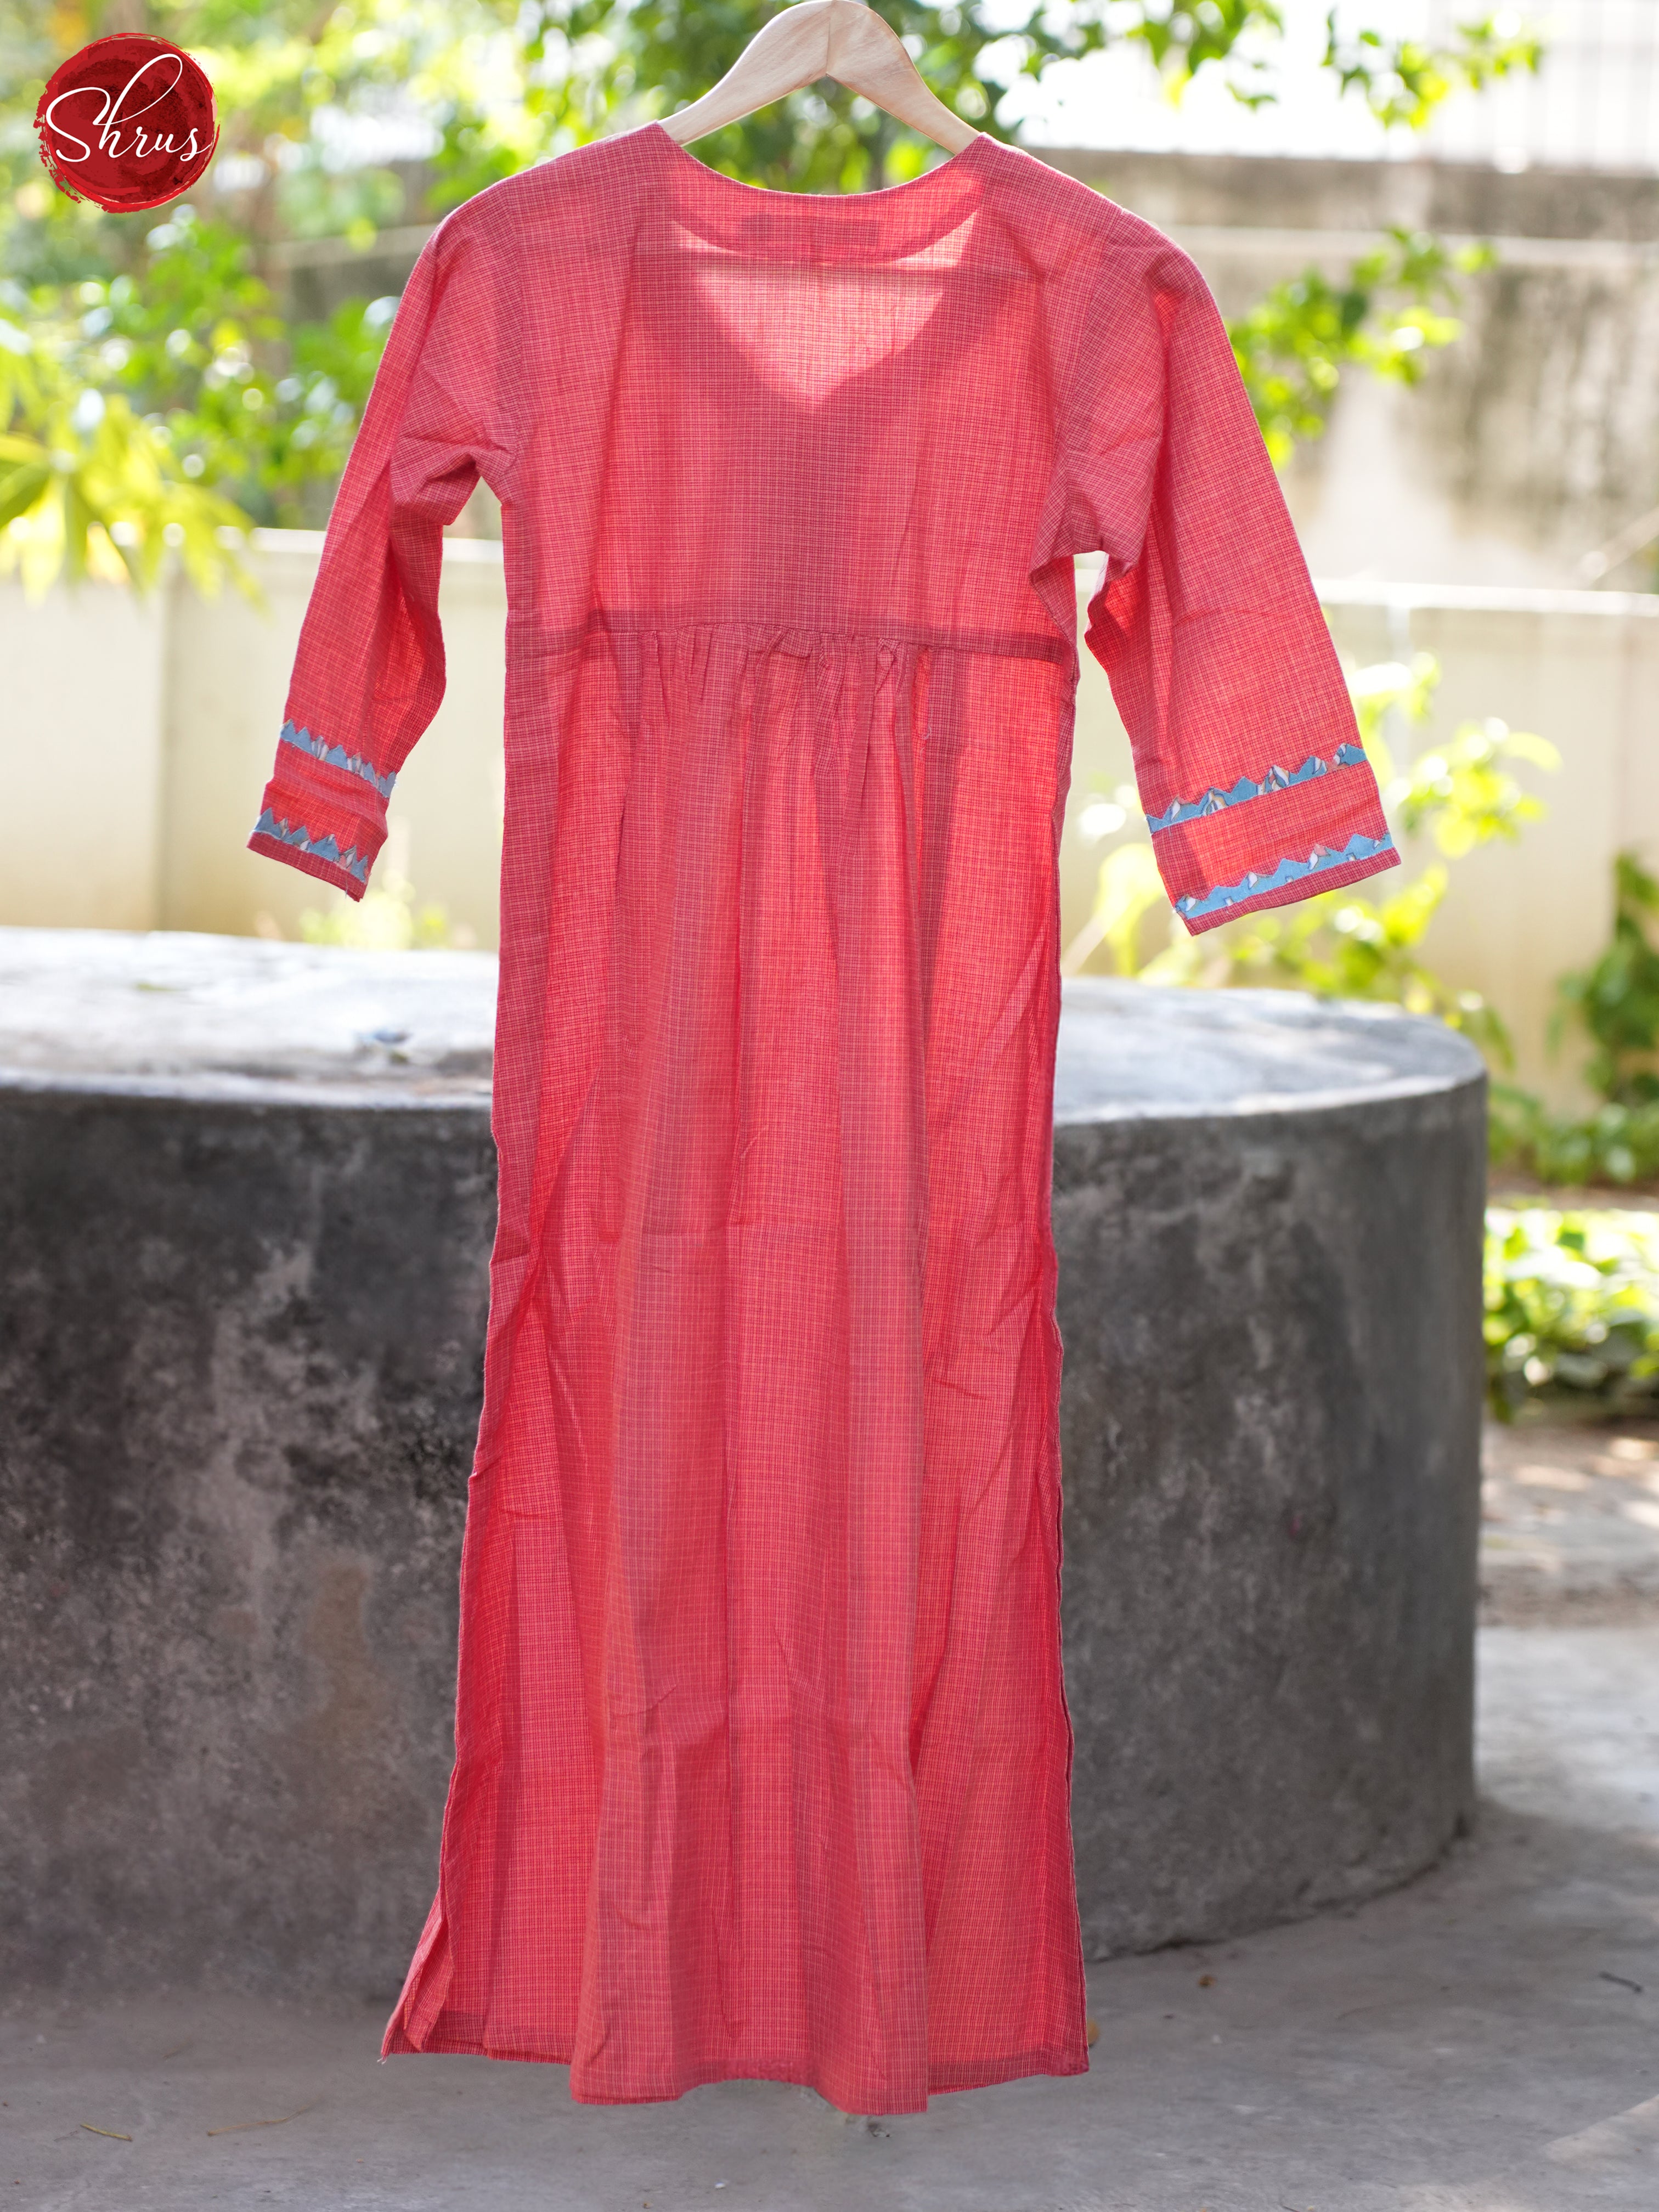 Red  - Lace Embroidery Readymade Kurti - Shop on ShrusEternity.com